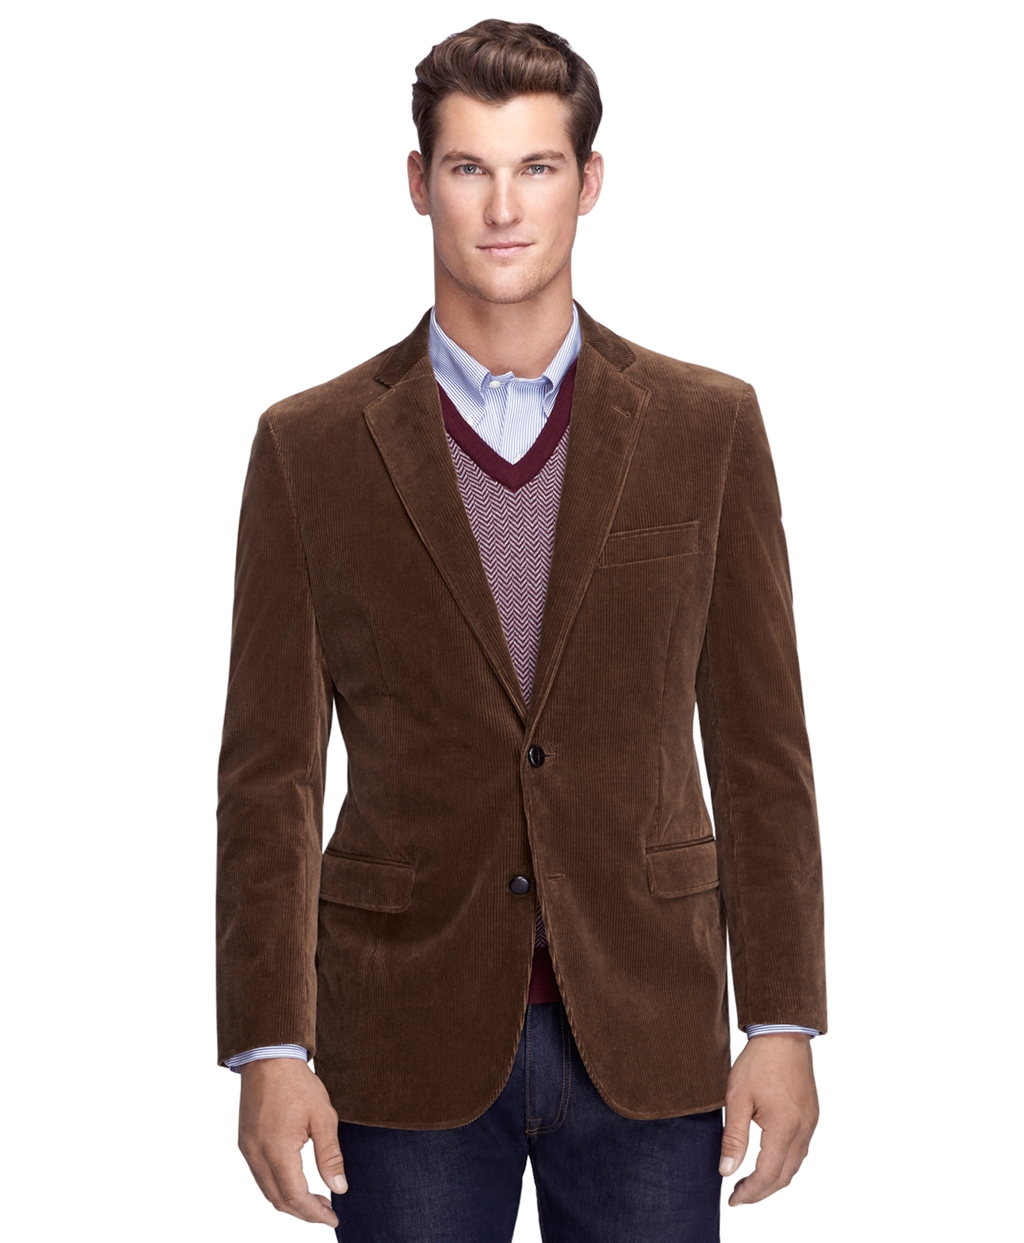 Lyst - Brooks Brothers Fitzgerald Fit Corduroy Sport Coat in Brown for Men